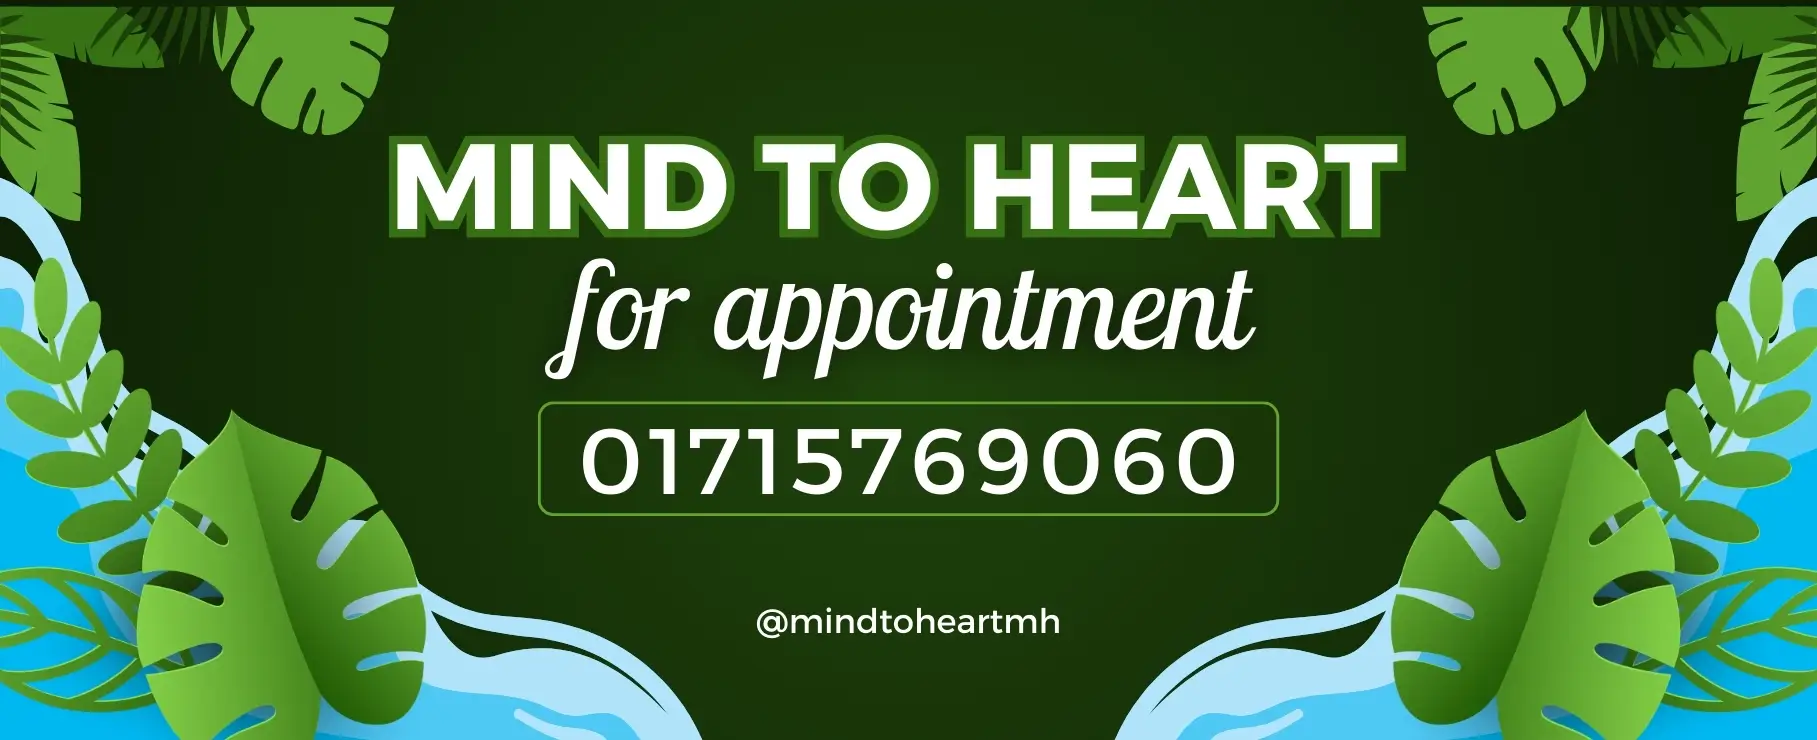 Mind to Heart Appointment